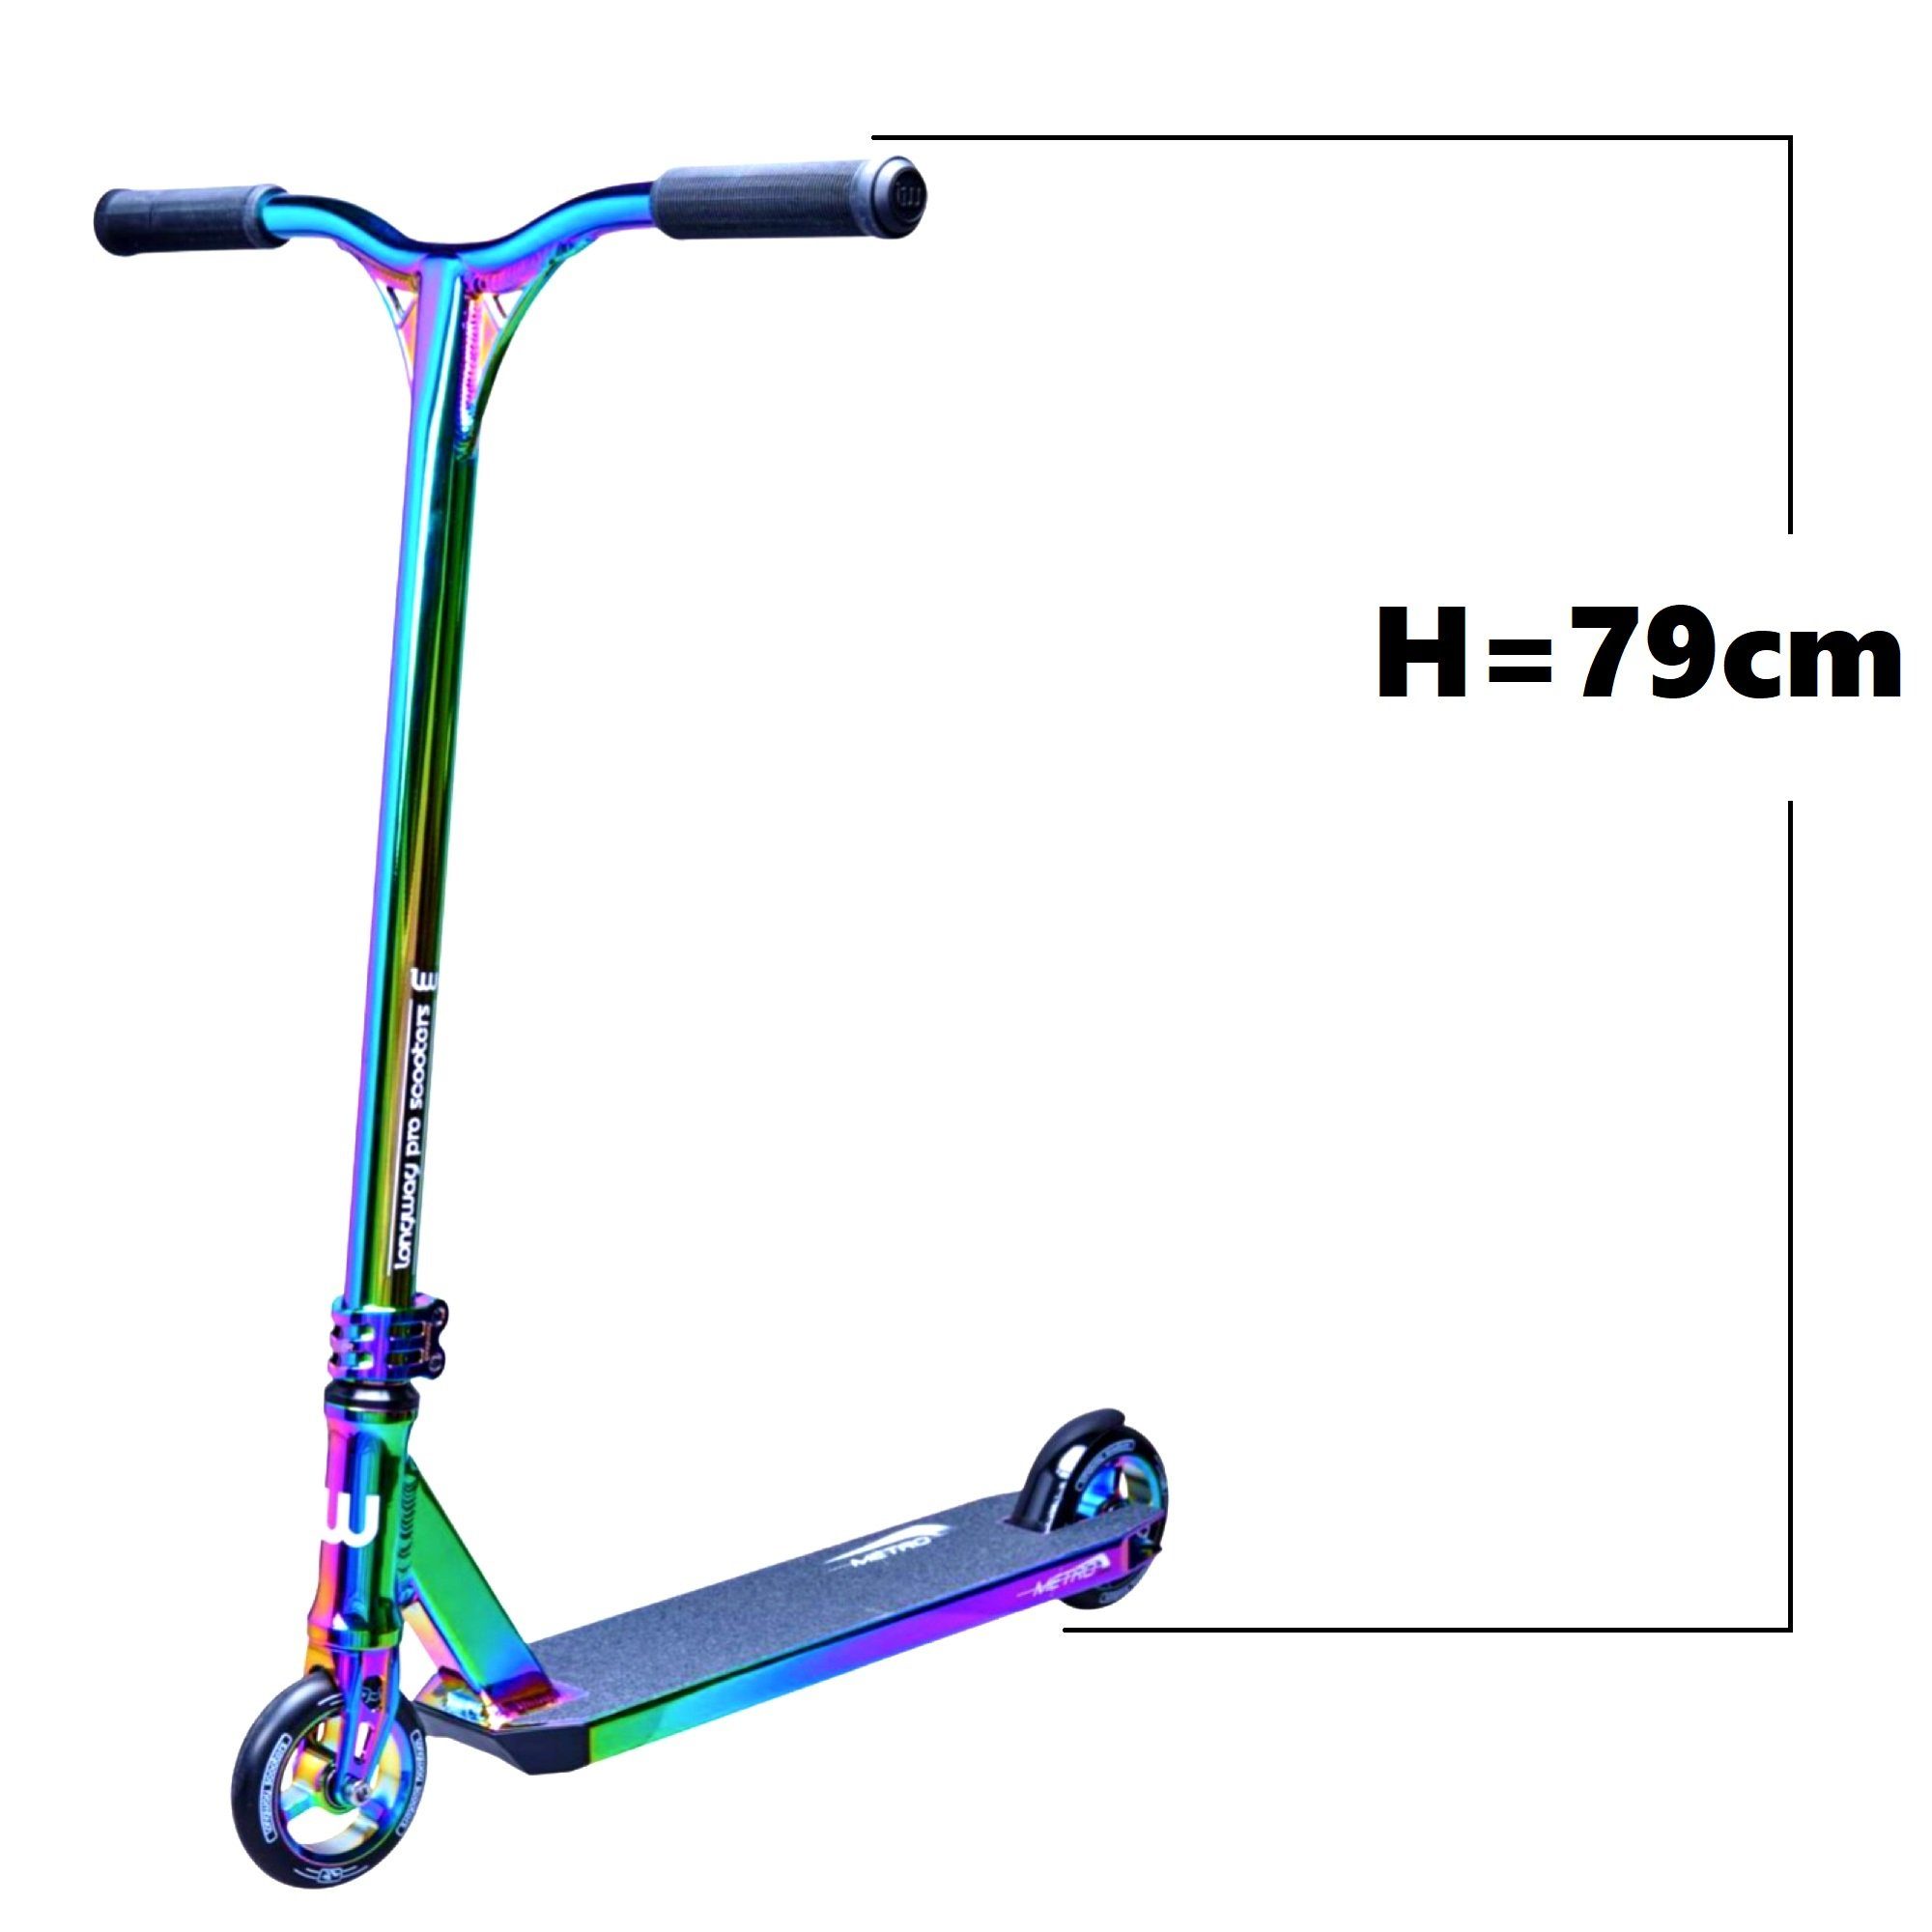 Stuntscooter Neochrom Full Longway Scooters 2K19 Longway H=79cm Metro Stunt-Scooter